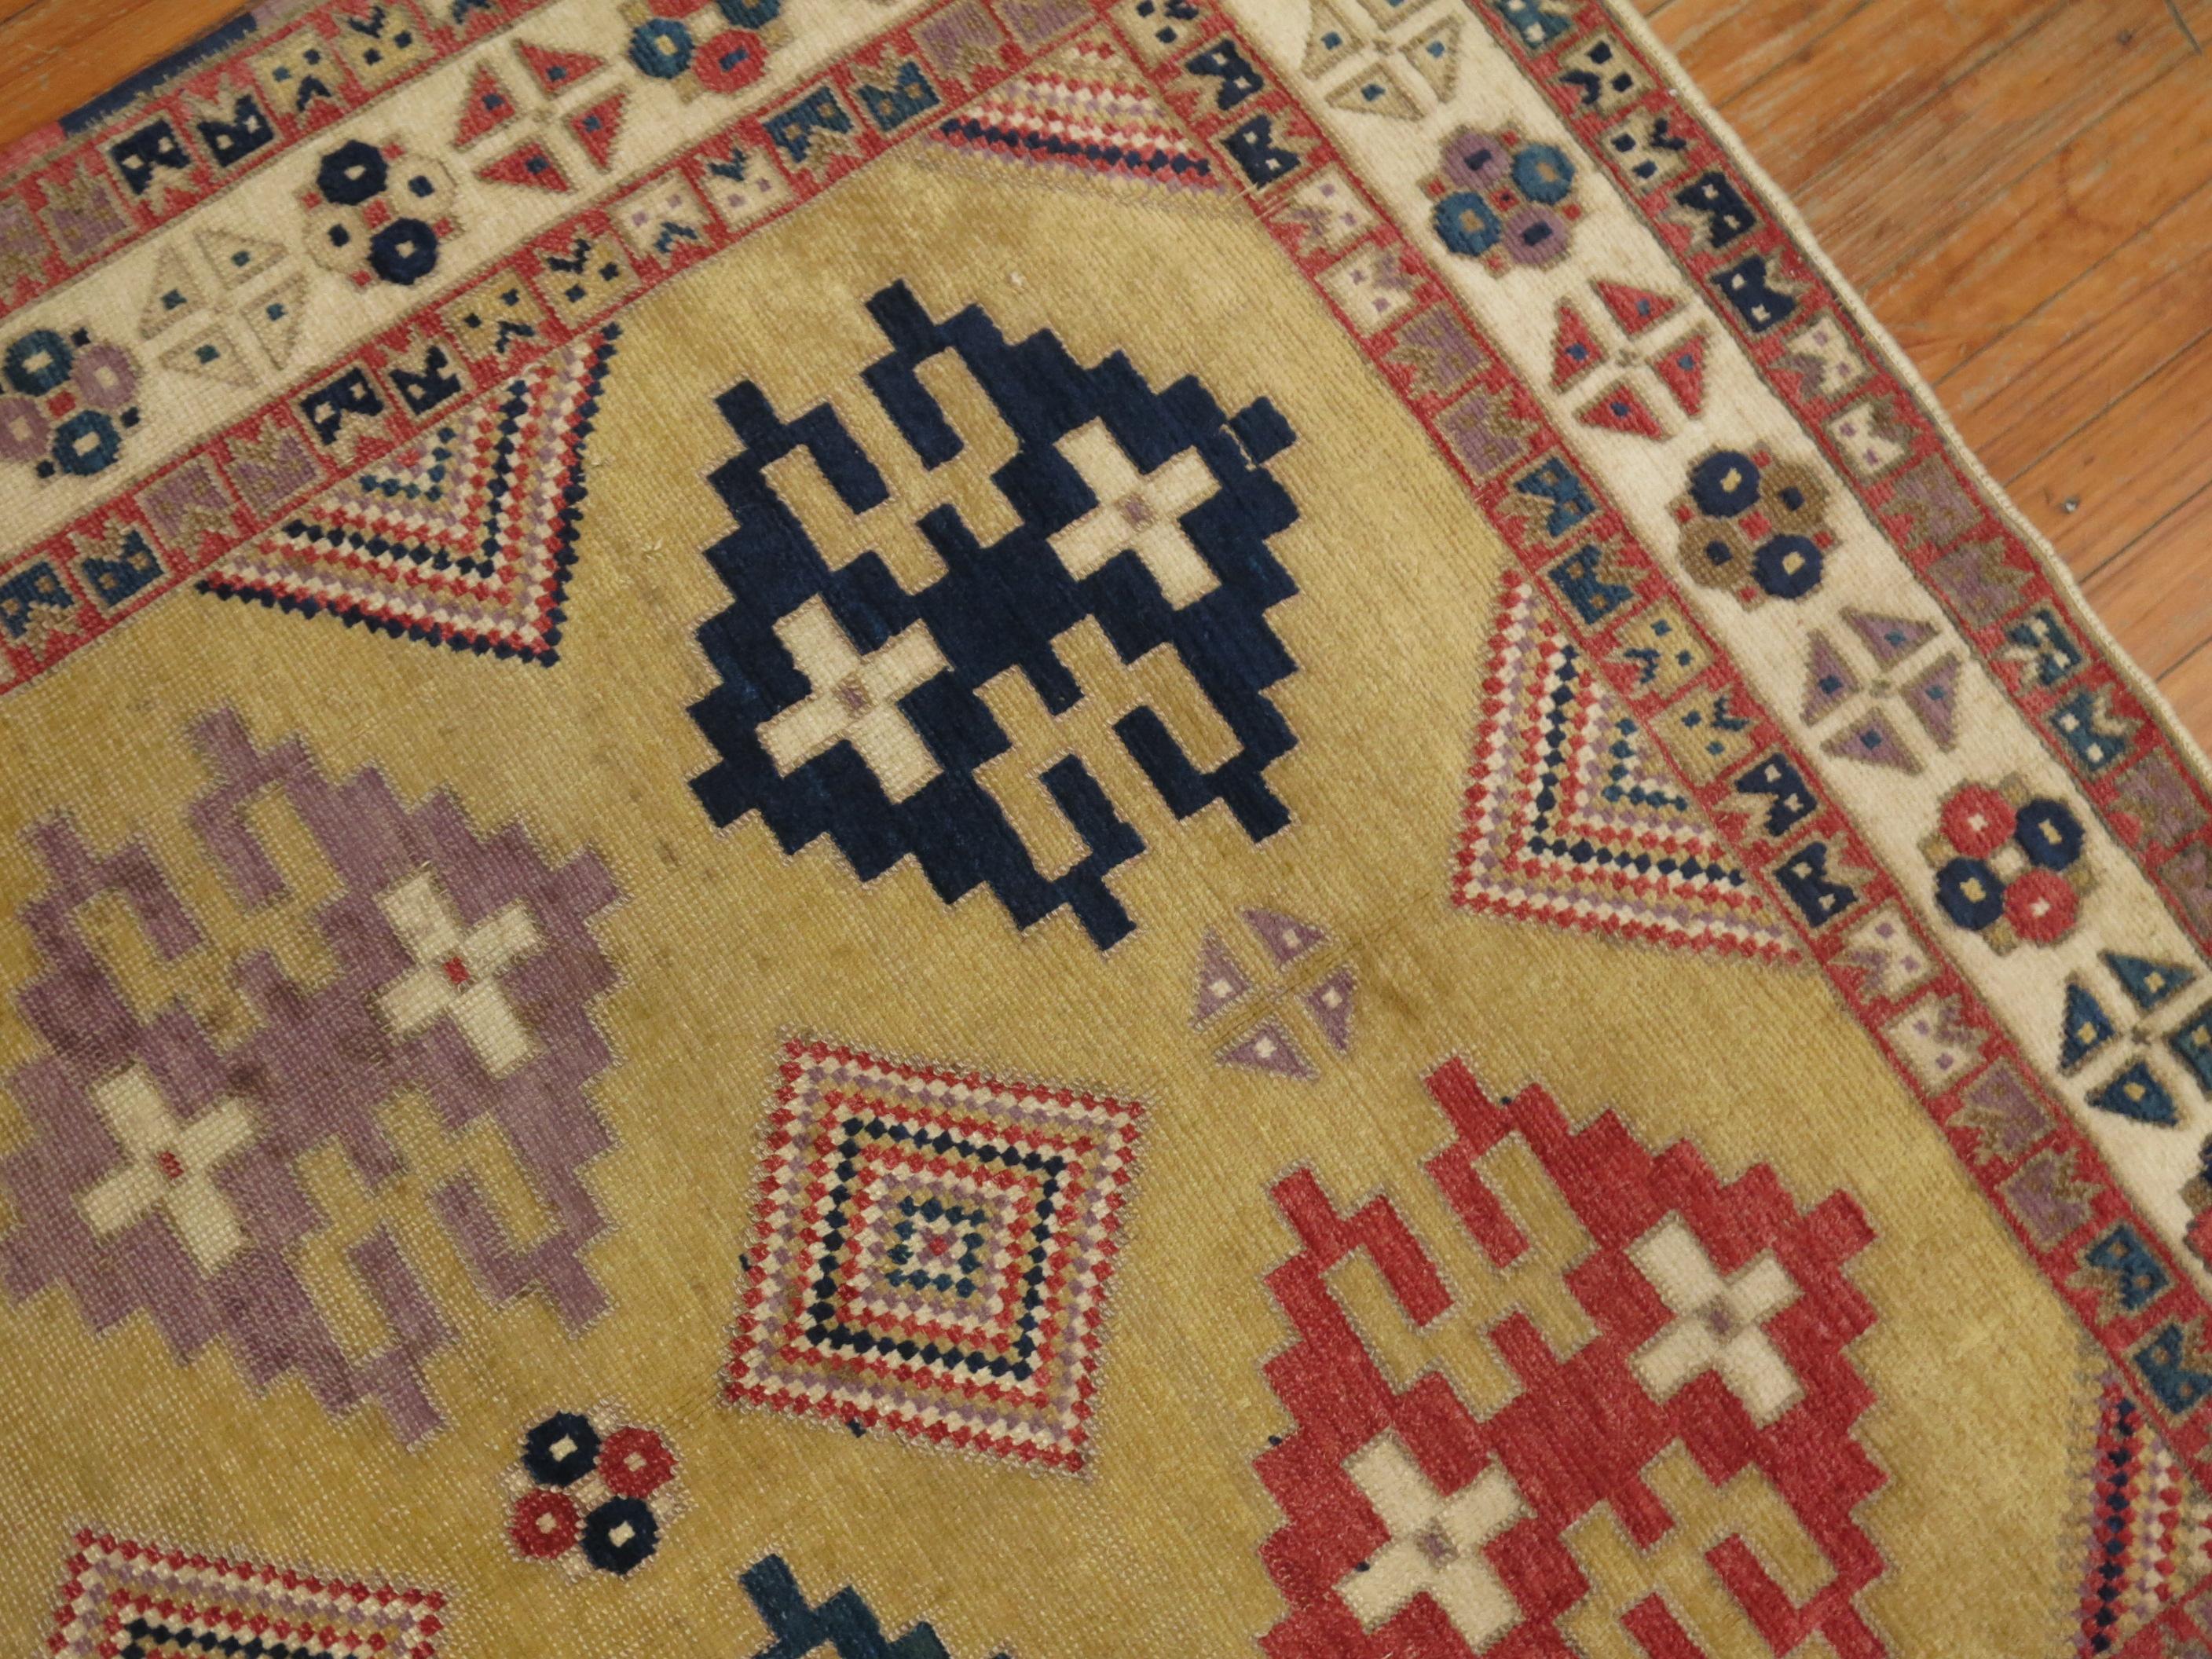 a late 20th century Turkish rug derived from early 20th century Caucasian rugs

4'5'' x 5'3''